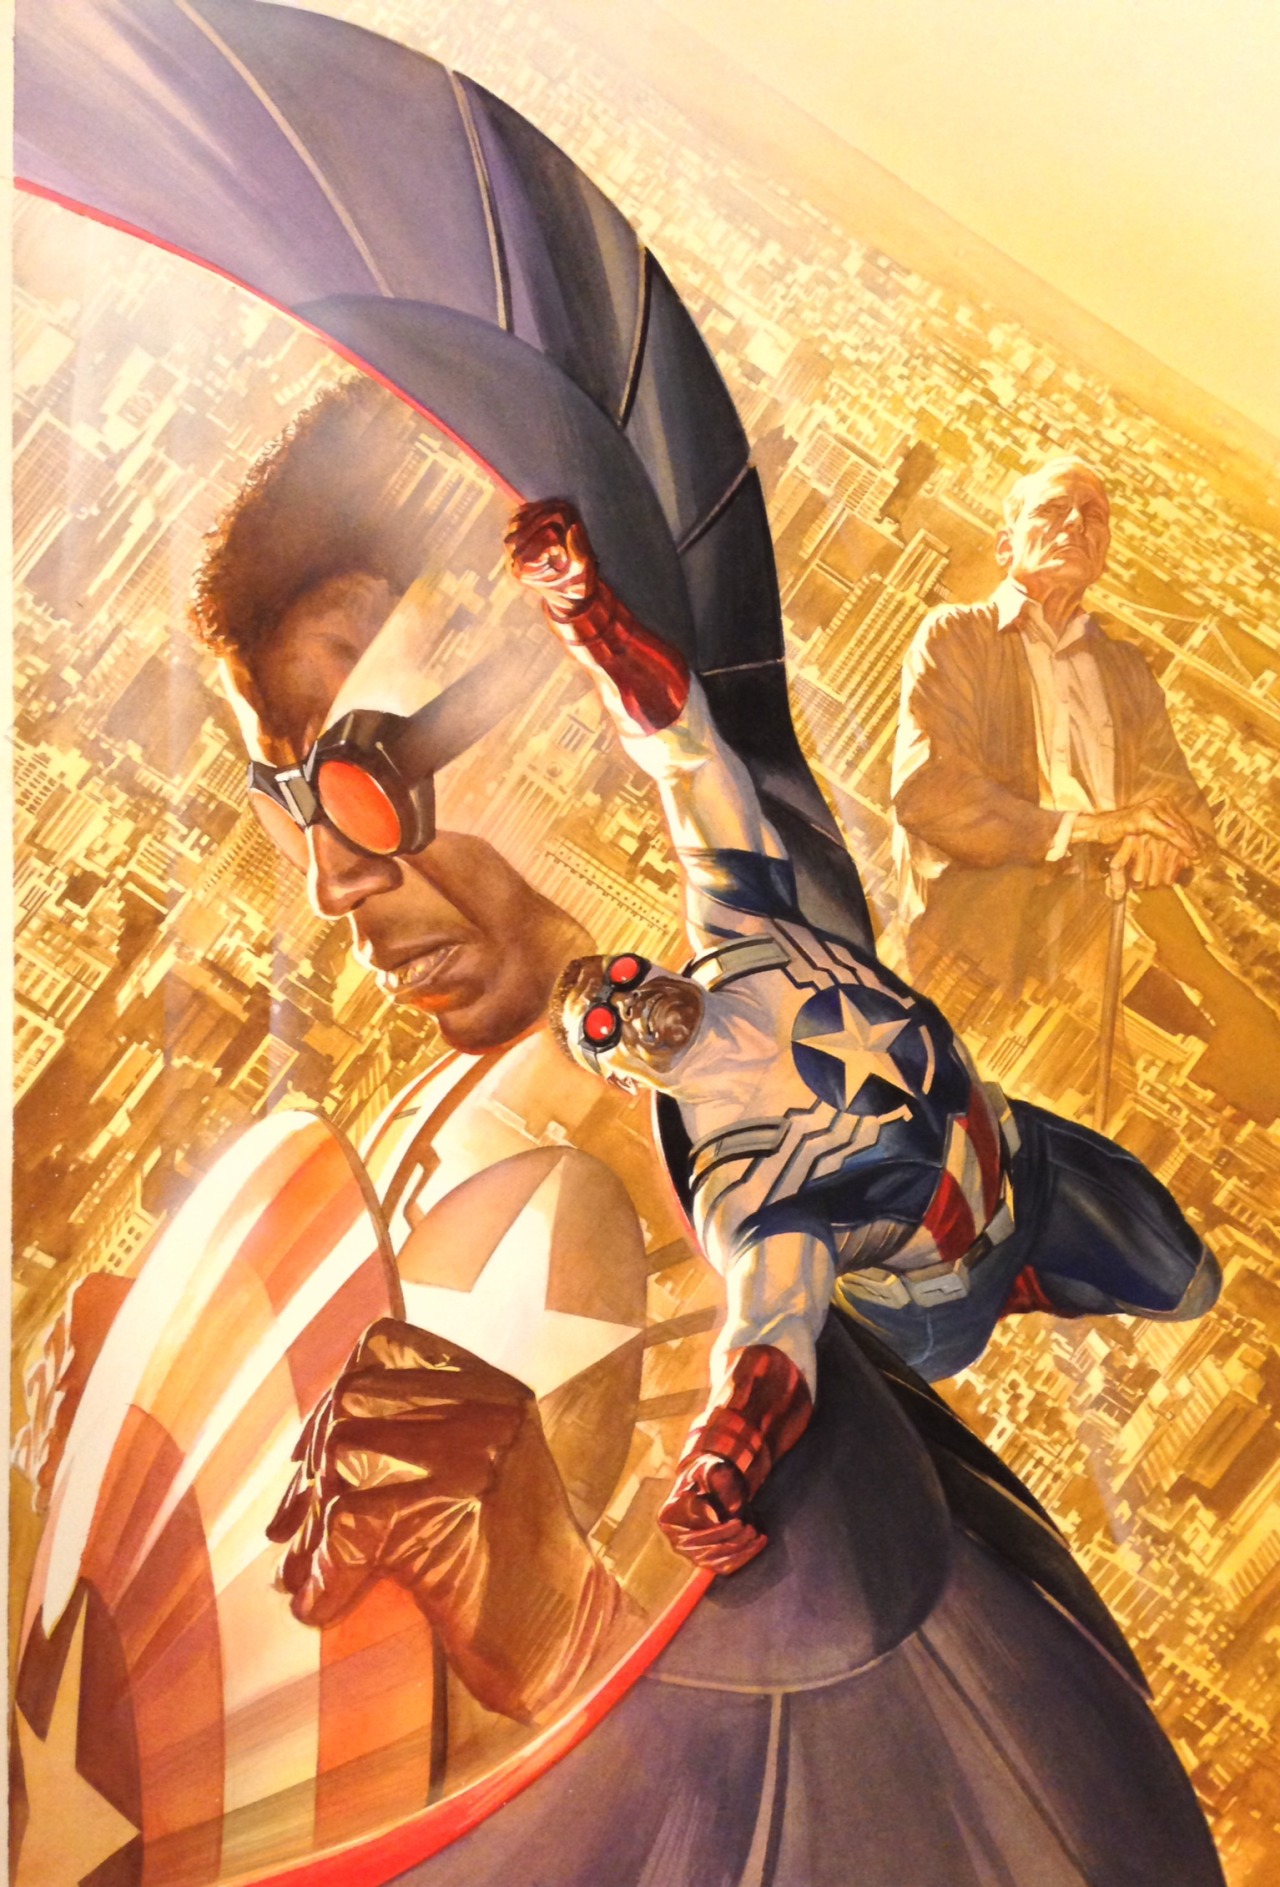 inthecomix:  IN THE COMIX PREVIEW: ALL-NEW CAPTAIN AMERICA #1! This November, the